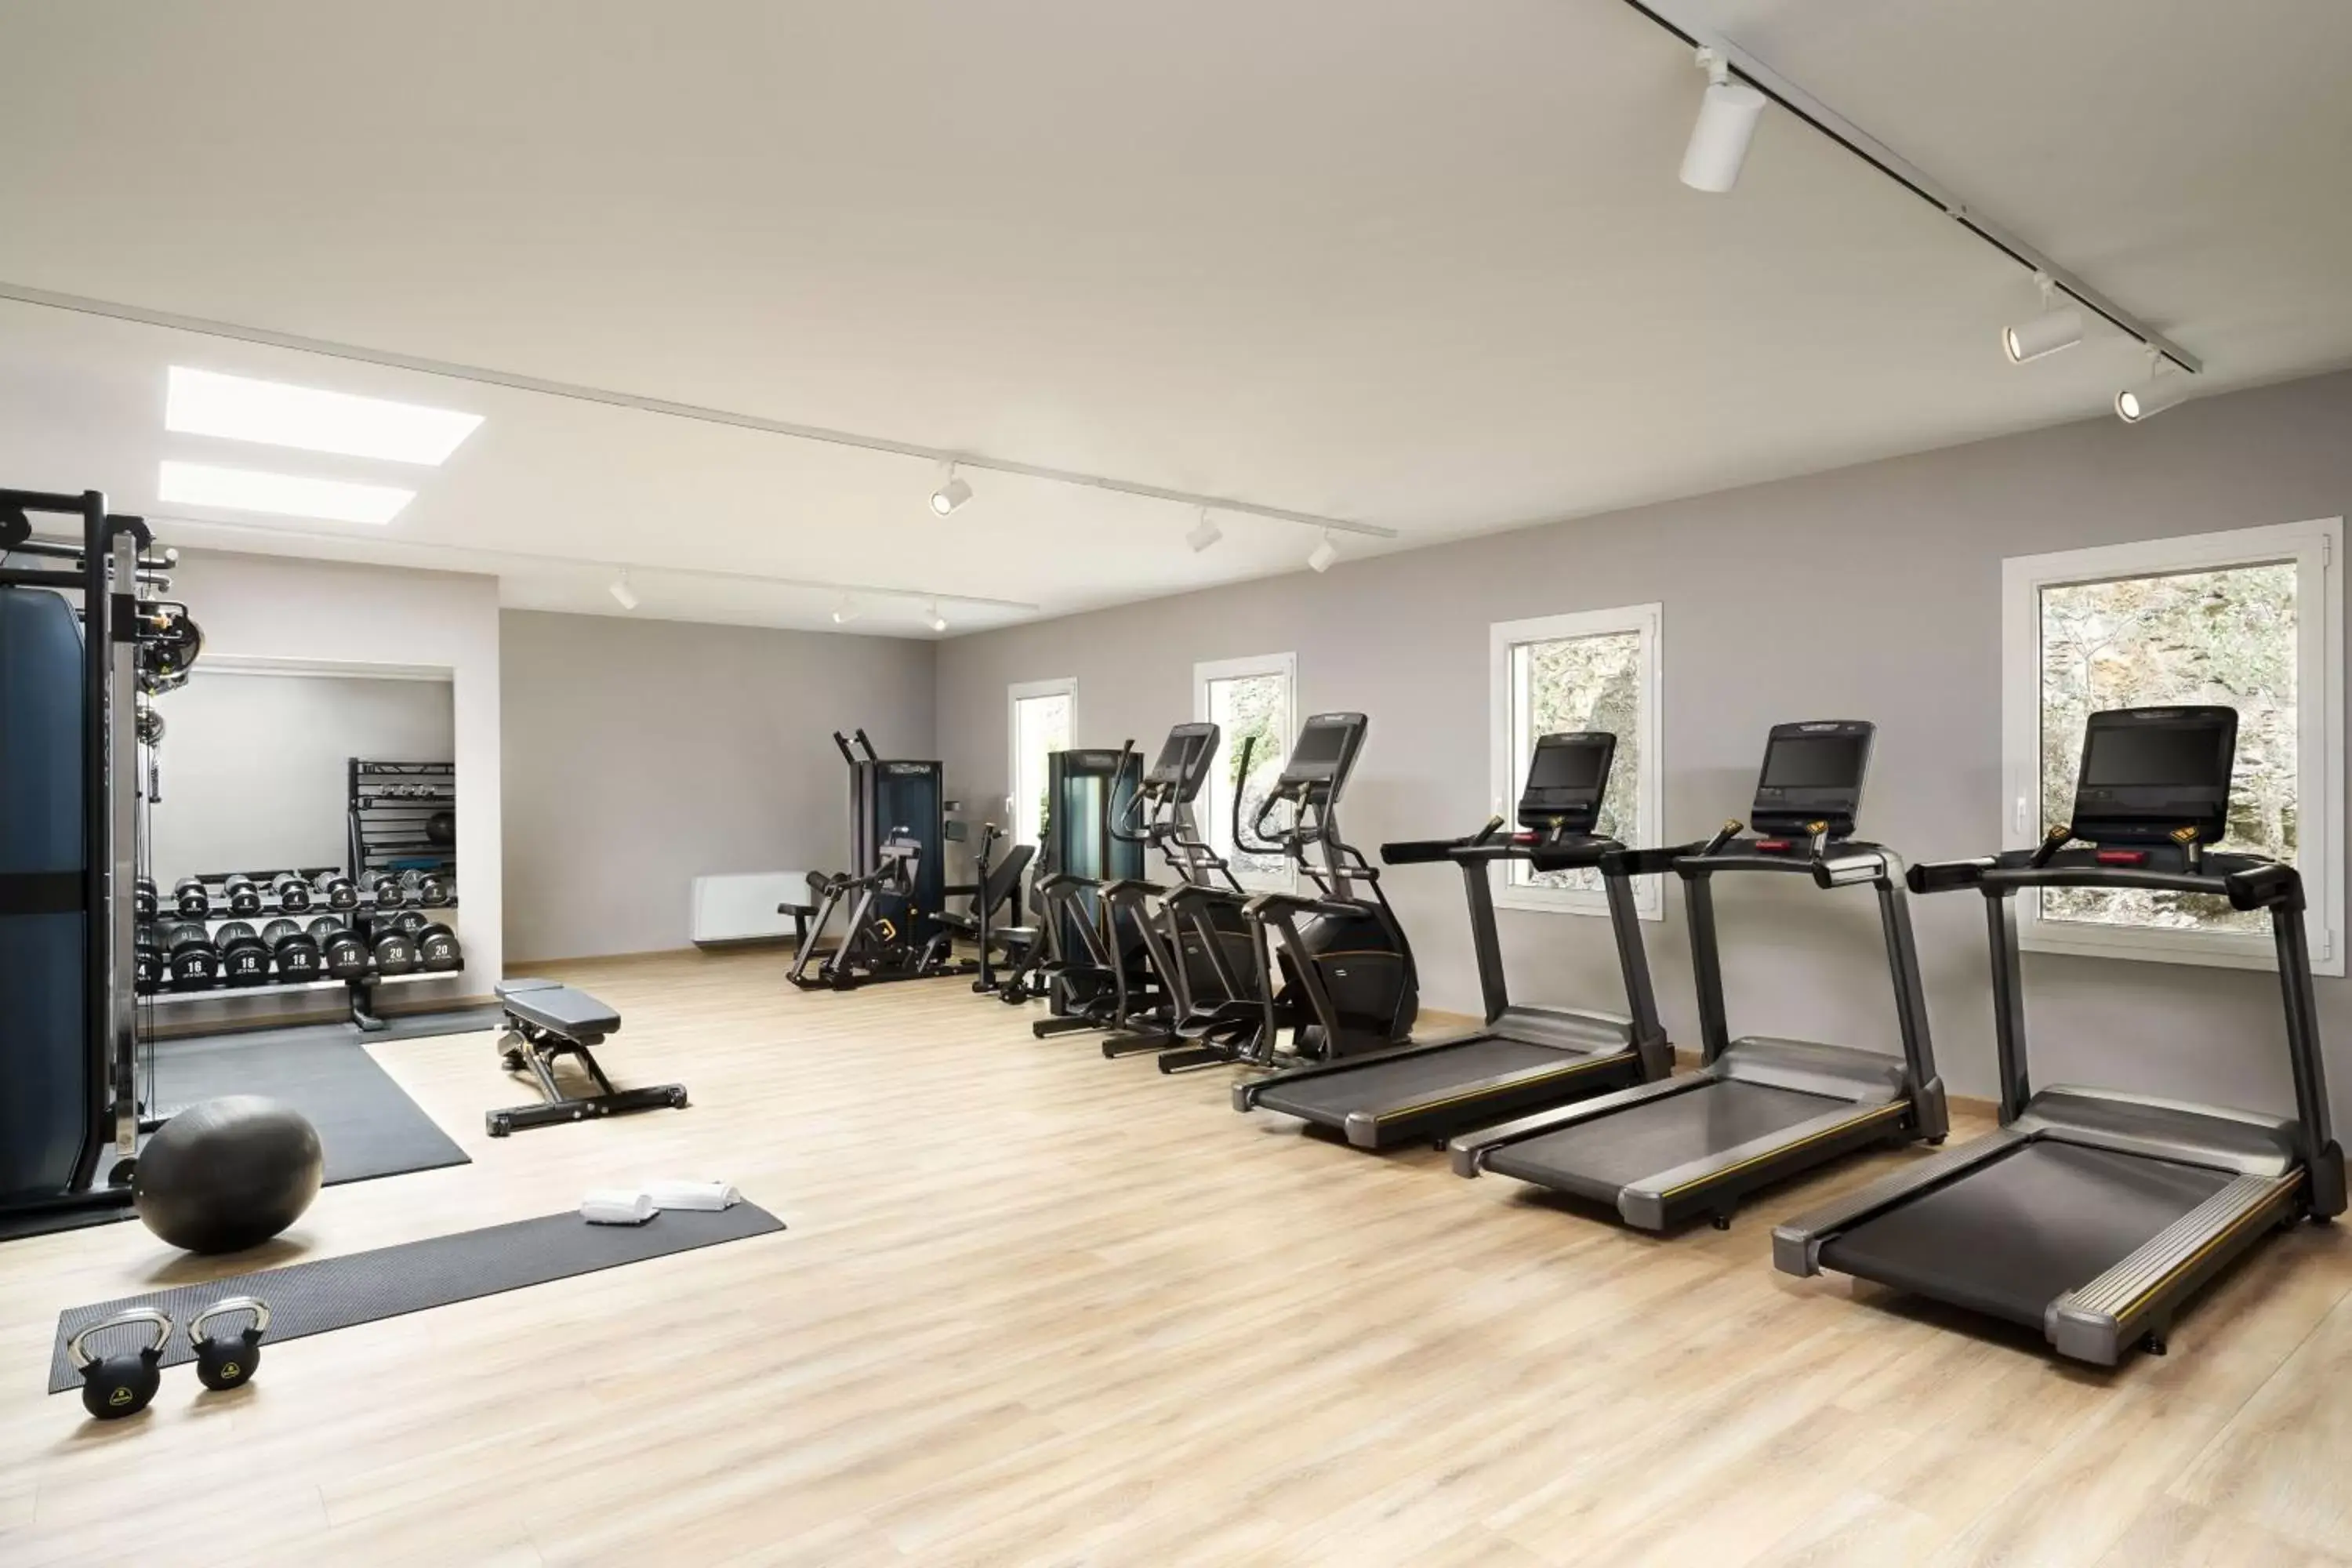 Fitness centre/facilities, Fitness Center/Facilities in Grotta Giusti Thermal Spa Resort Tuscany, Autograph Collection